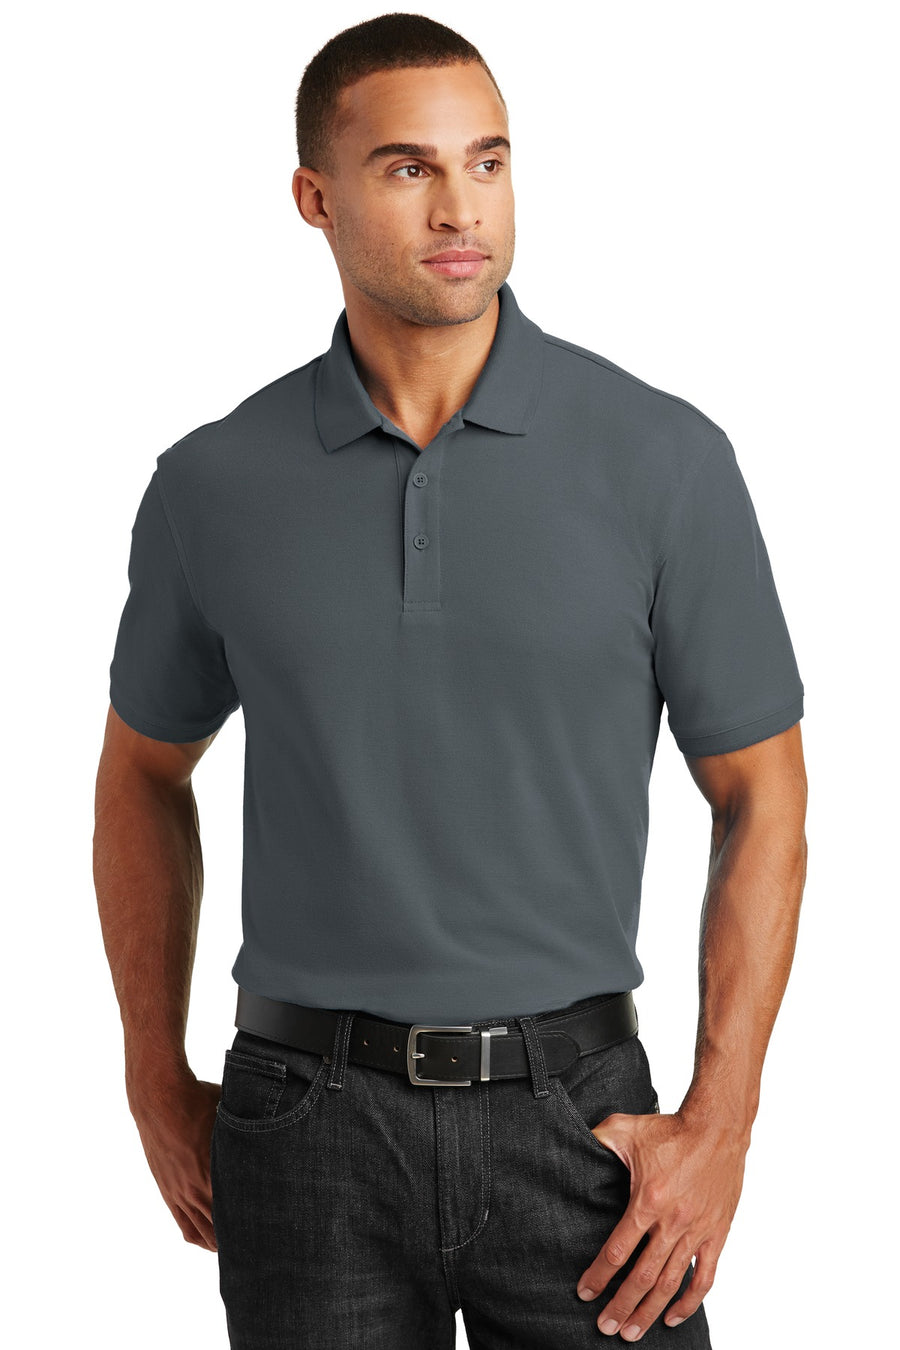 Port Authority Tall Core Classic Pique Polo.